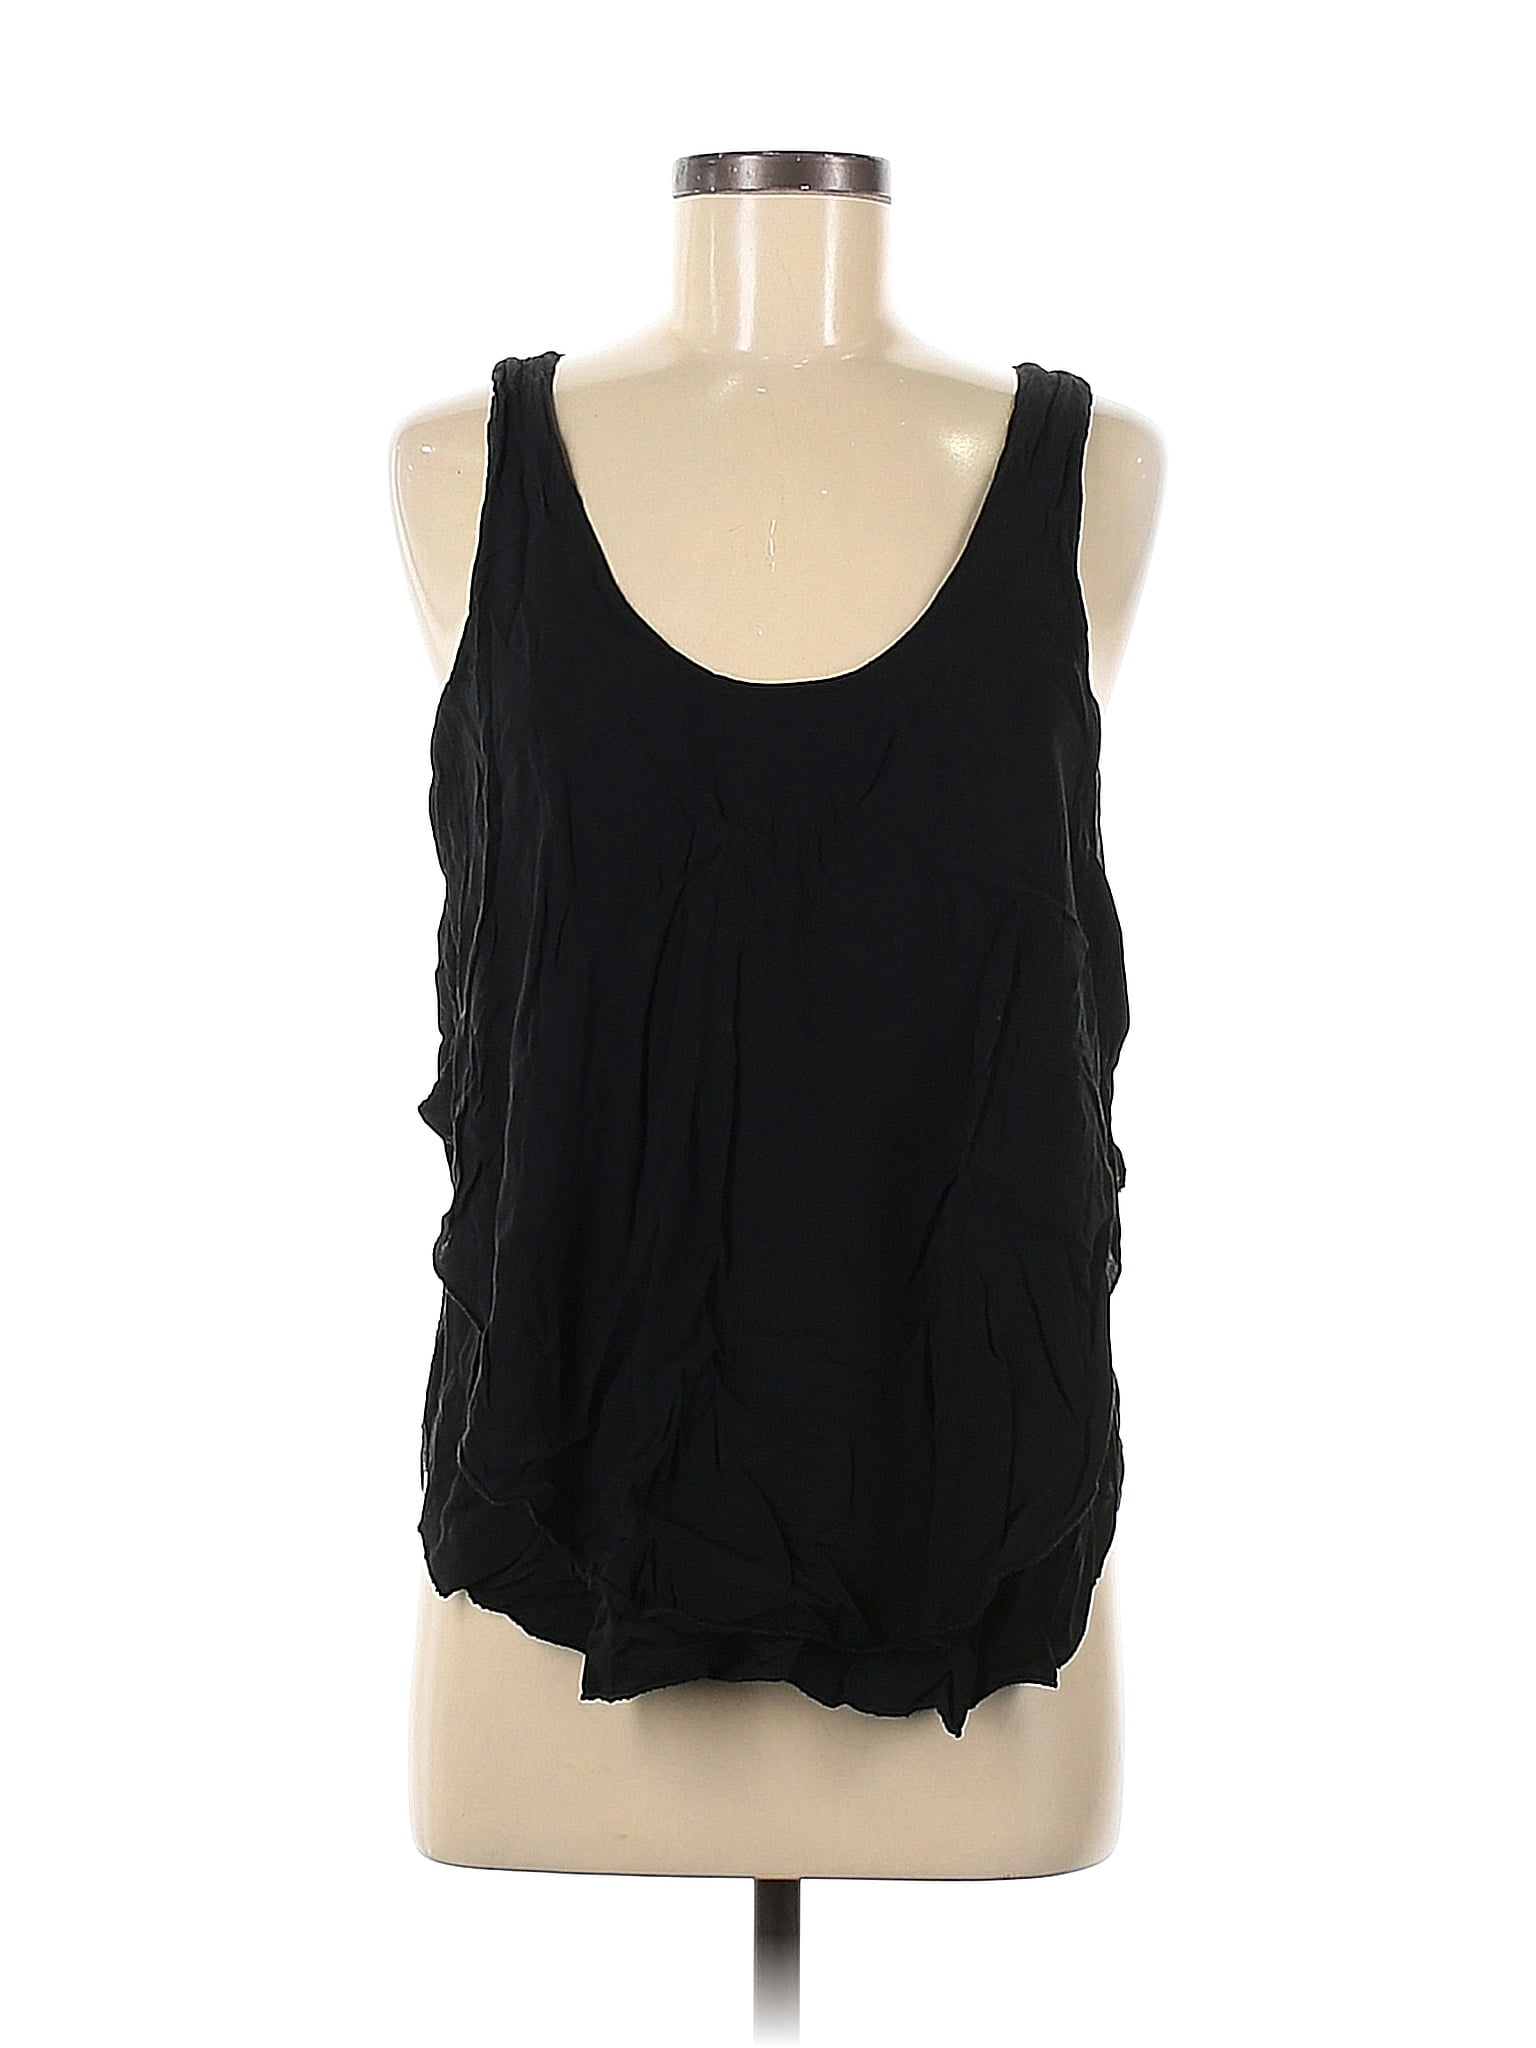 Don't Ask Why 100% Viscose Solid Black Tank Top One Size - 76% off ...